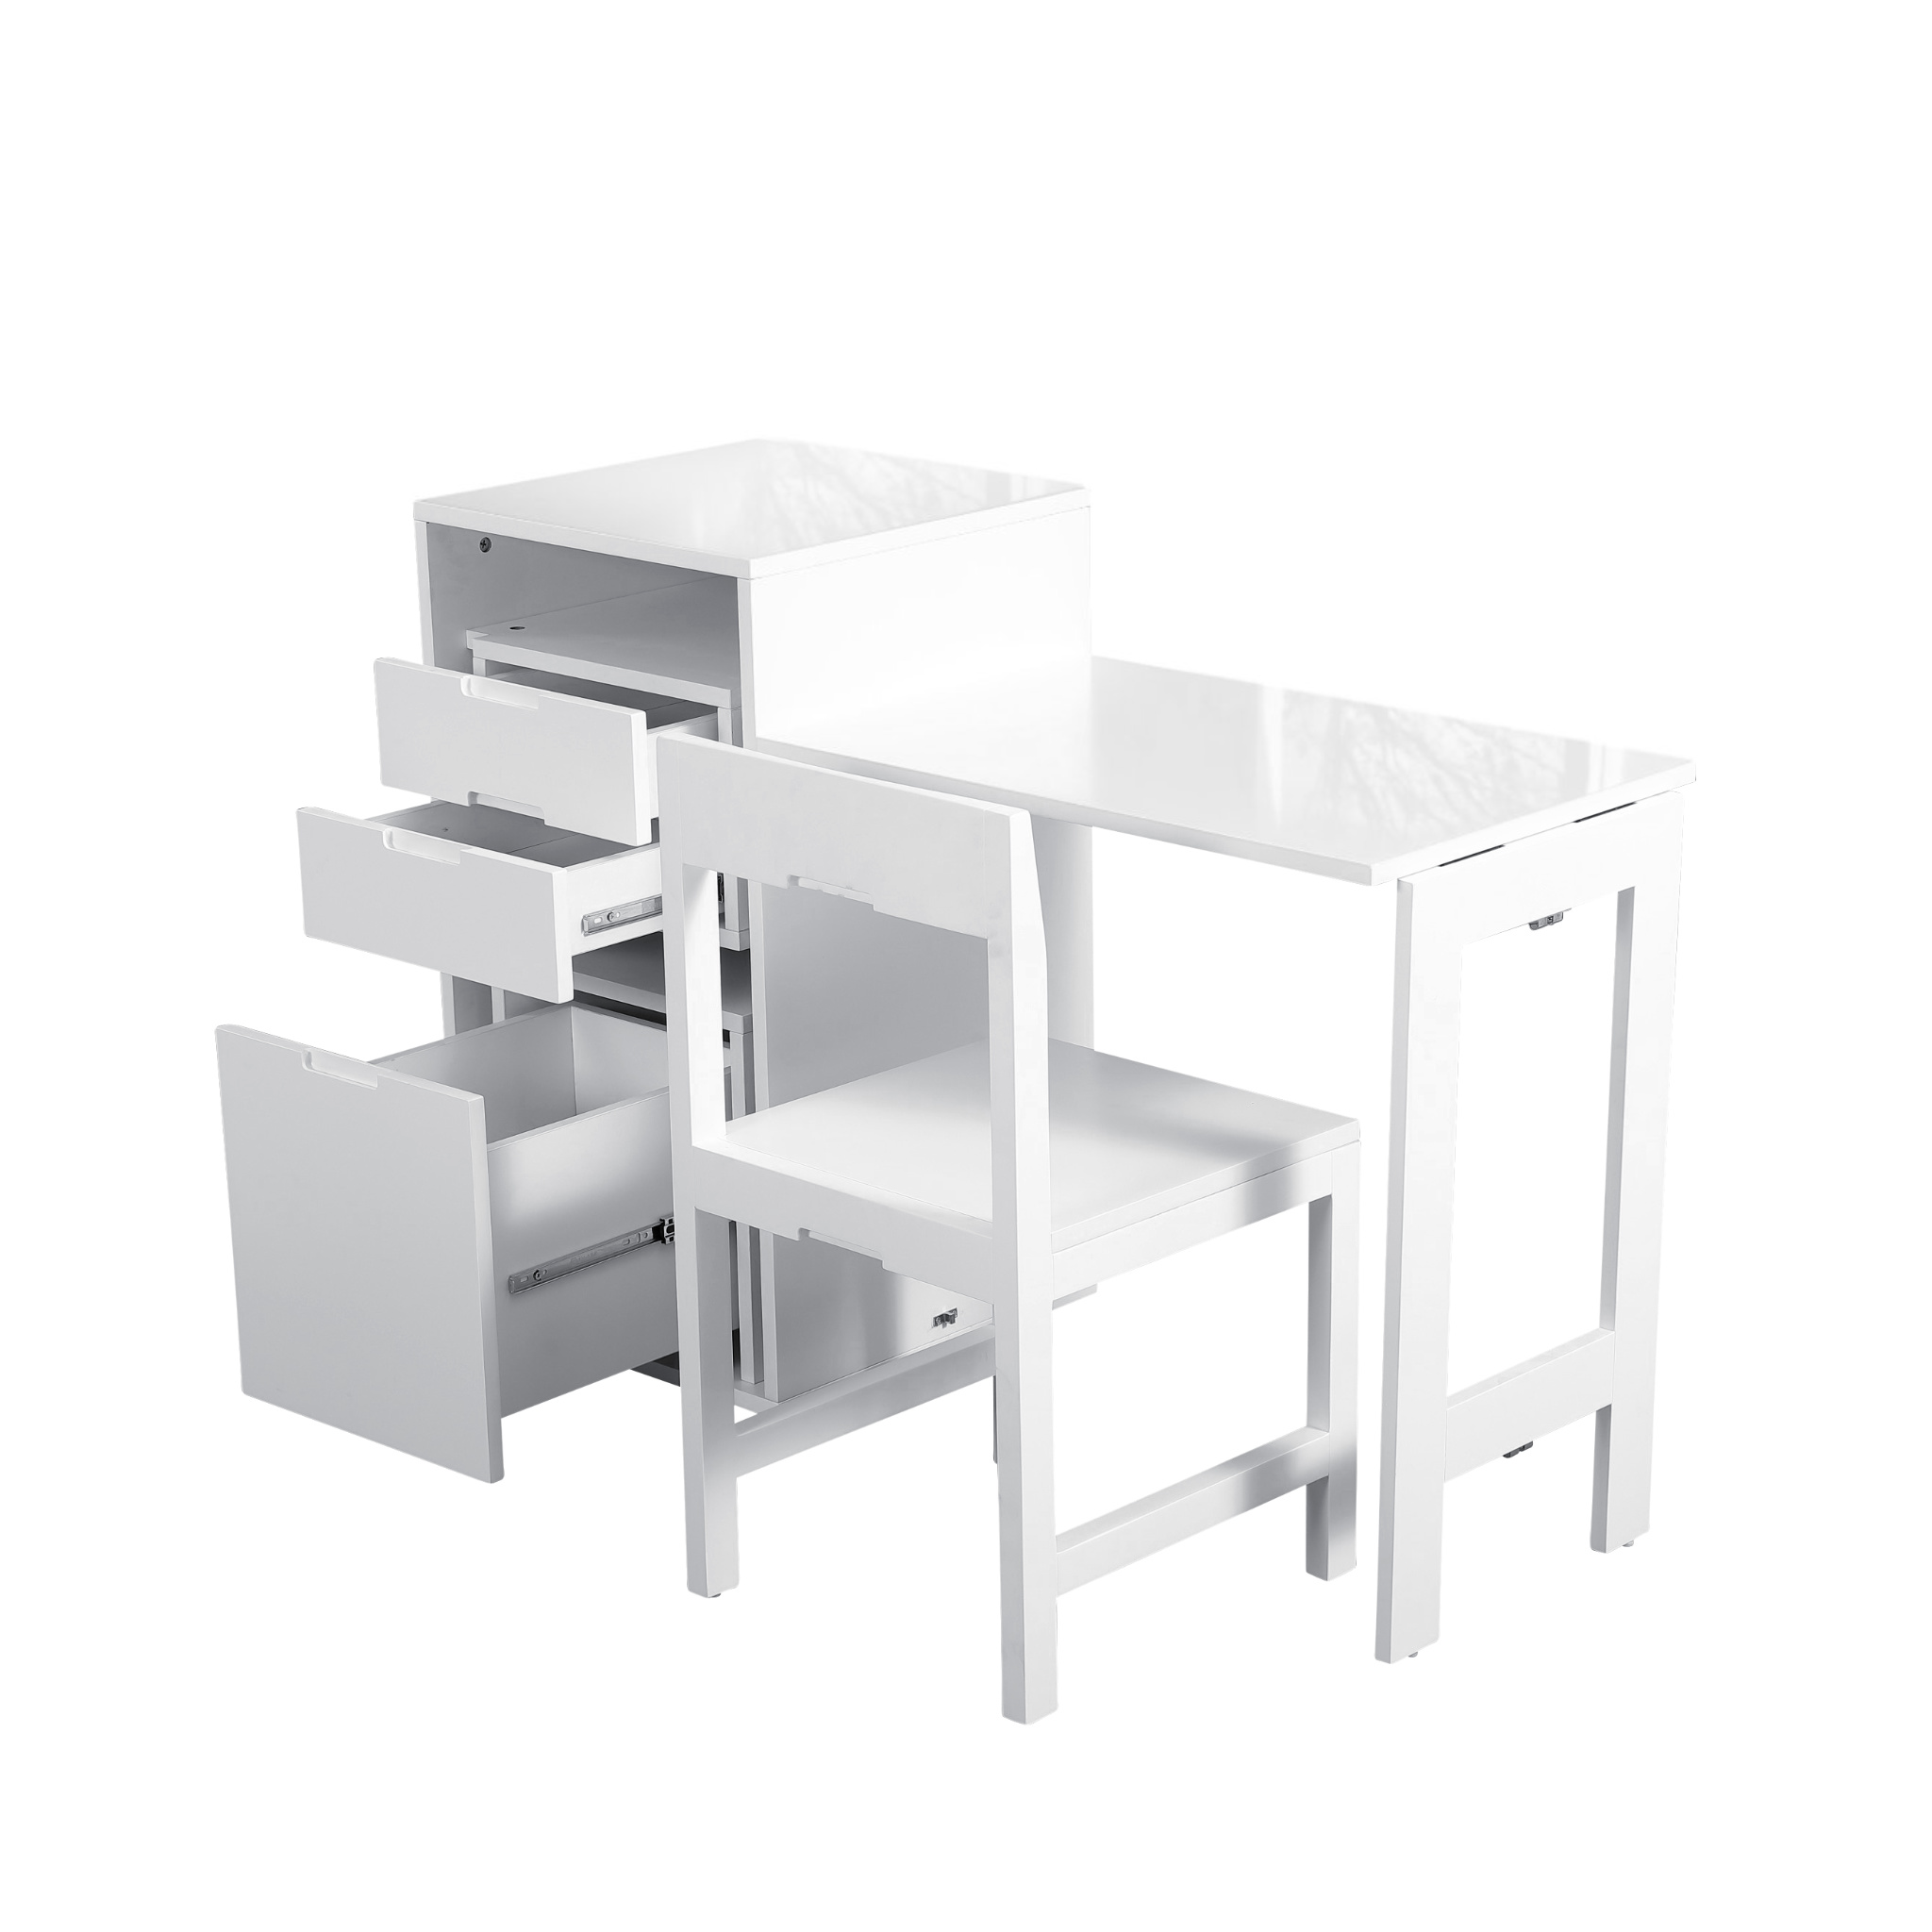 https://expandfurniture.com/wp-content/uploads/2021/05/Ludovico-micro-office-open-with-hidden-chair-and-table-in-office-cabinet-Glossy-White.jpg